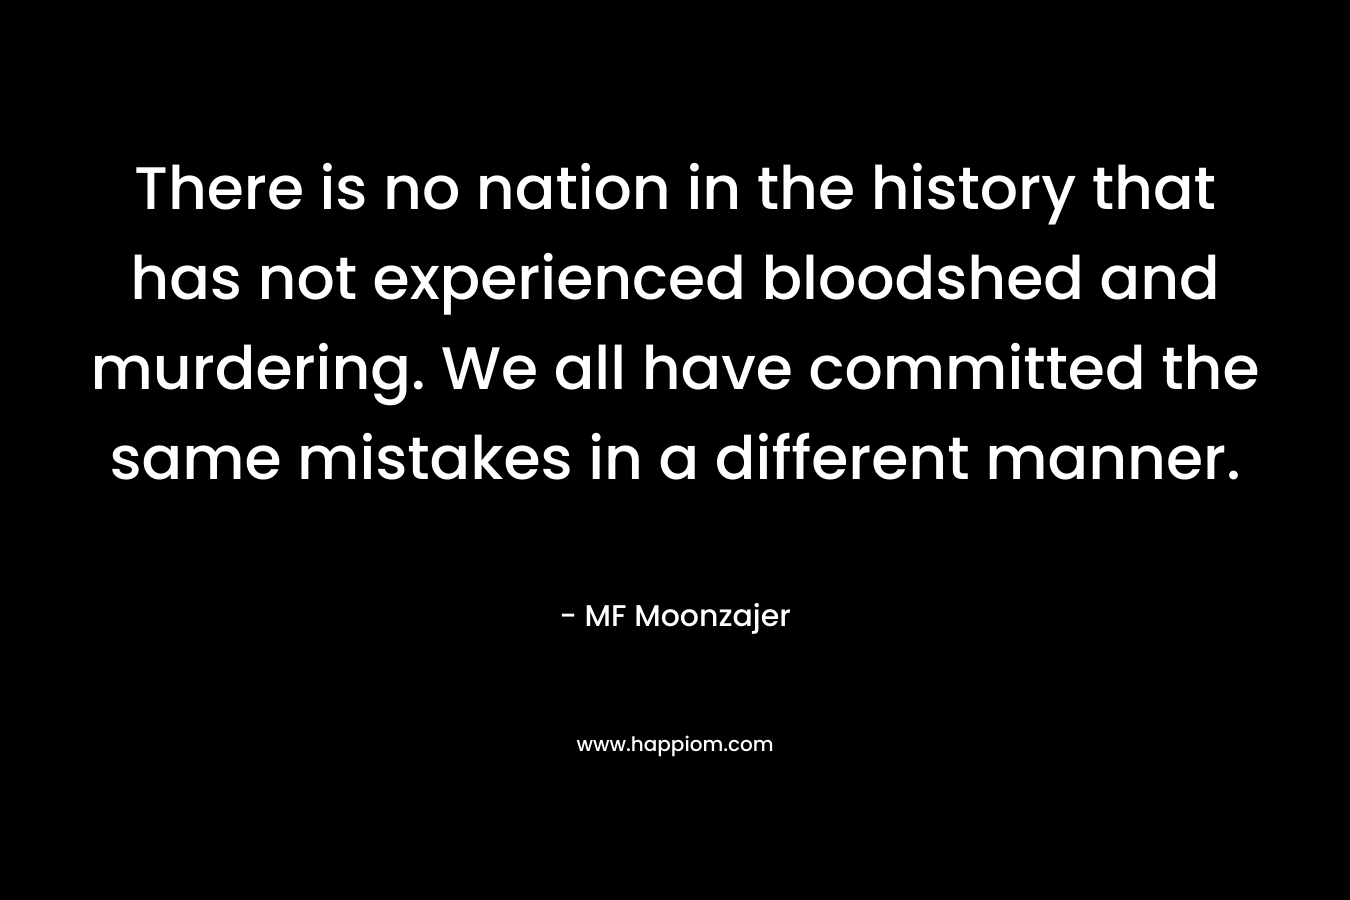 There is no nation in the history that has not experienced bloodshed and murdering. We all have committed the same mistakes in a different manner.